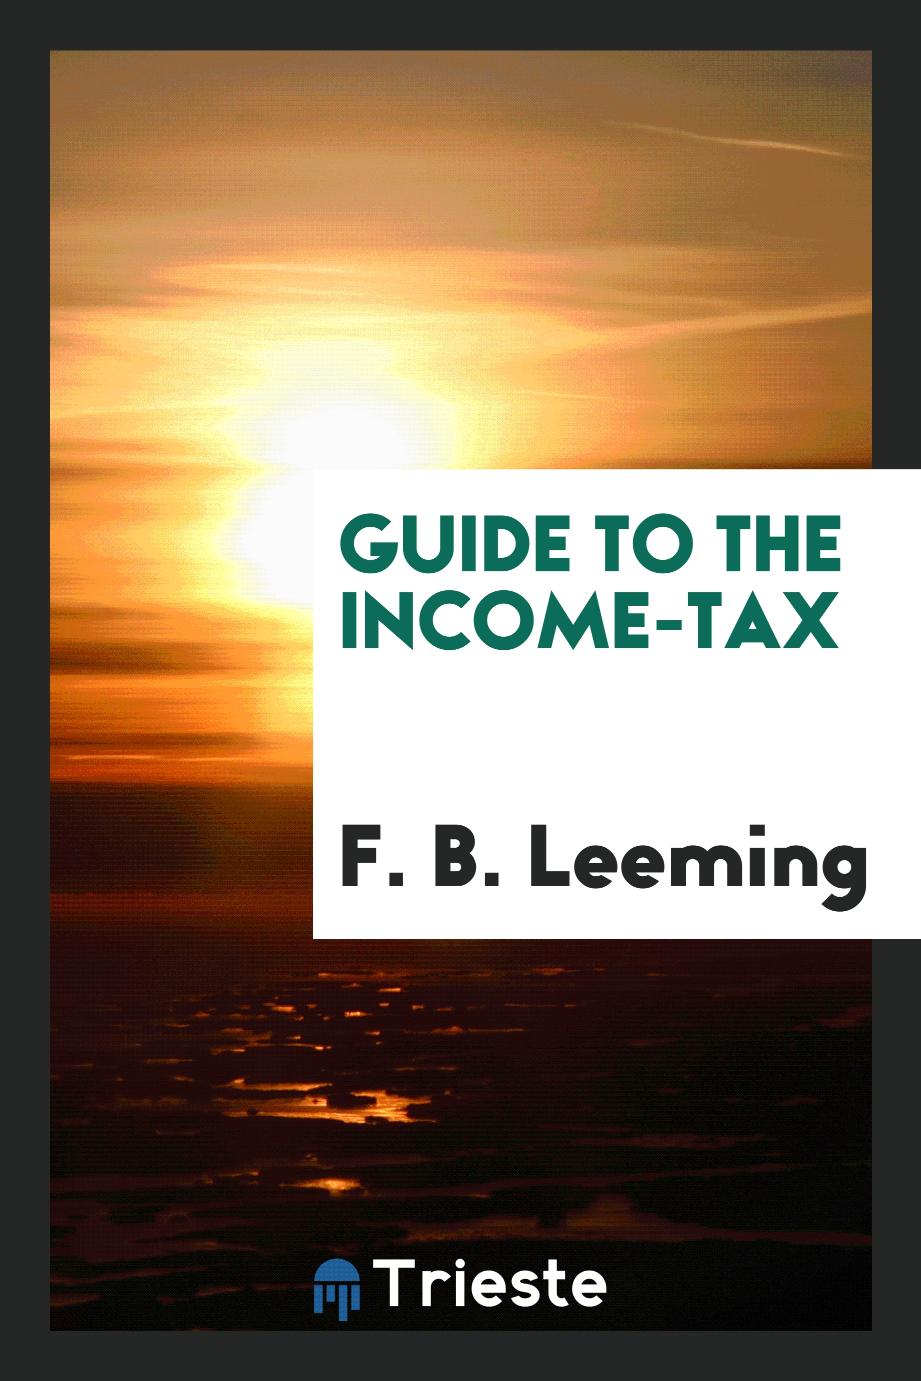 Guide to the income-tax